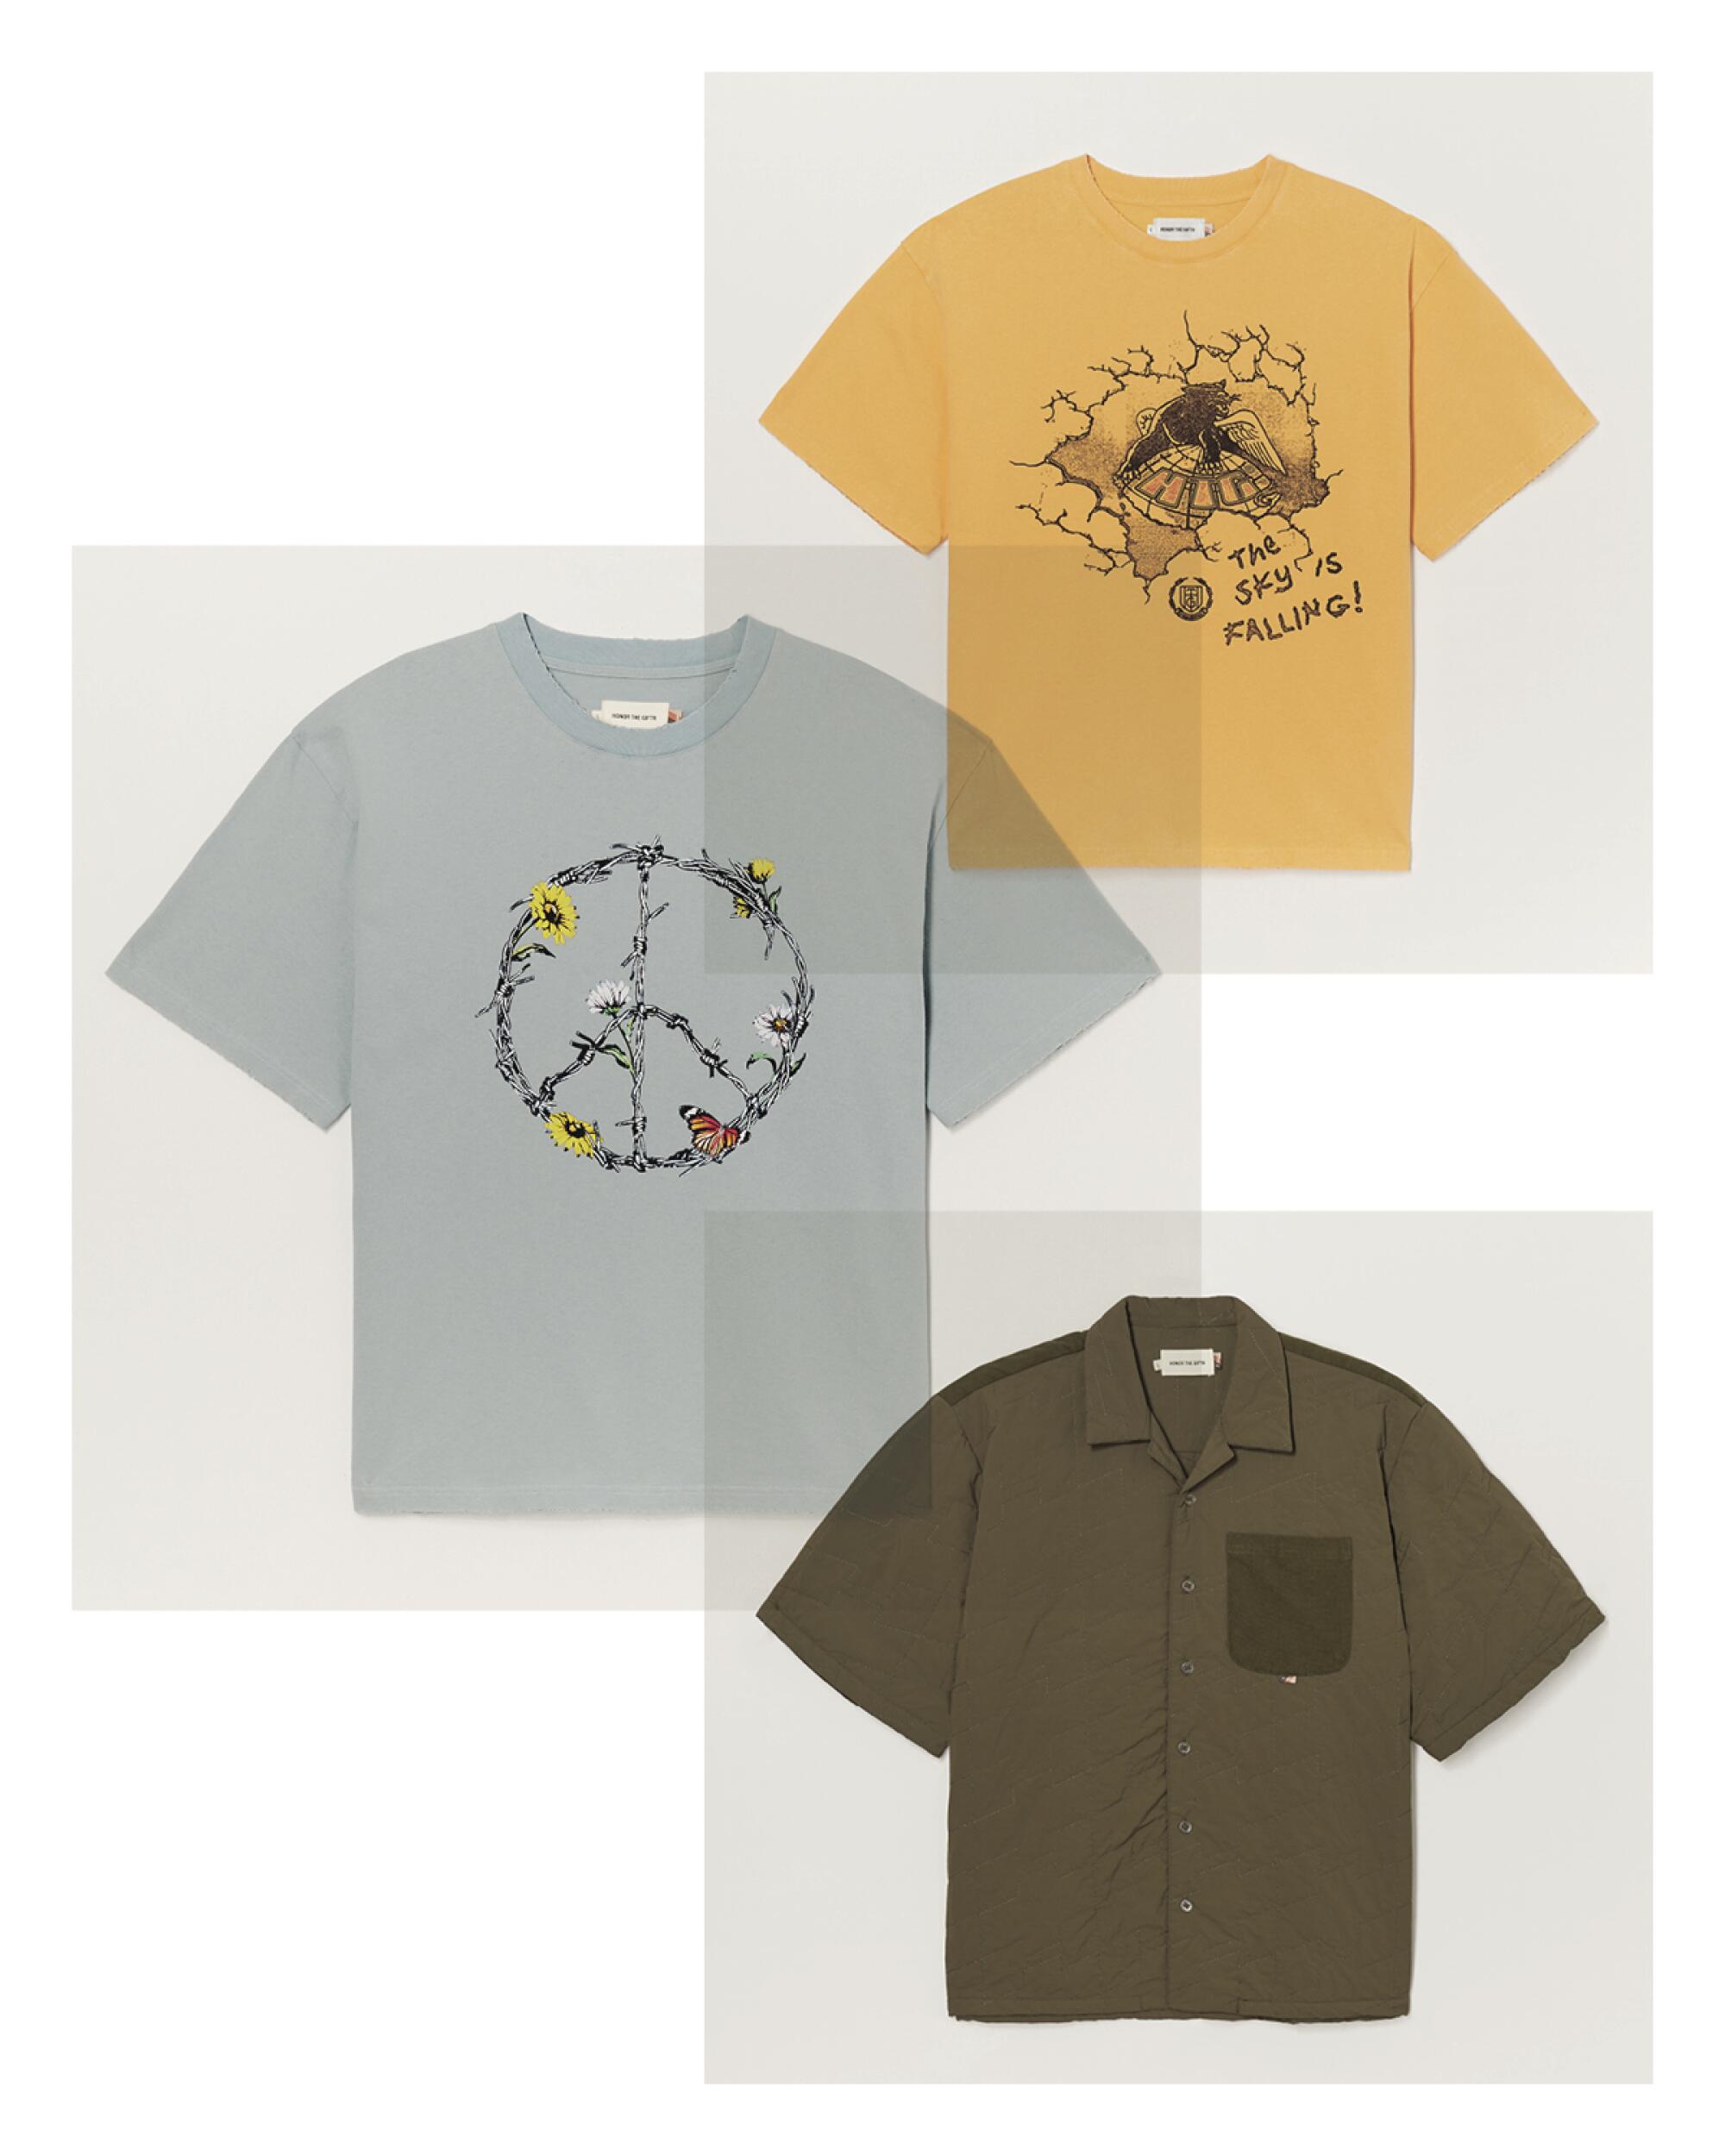 A T-shirt with a peace symbol, a T-shirt that says, 'The Sky's Falling!' and a green collared shirt